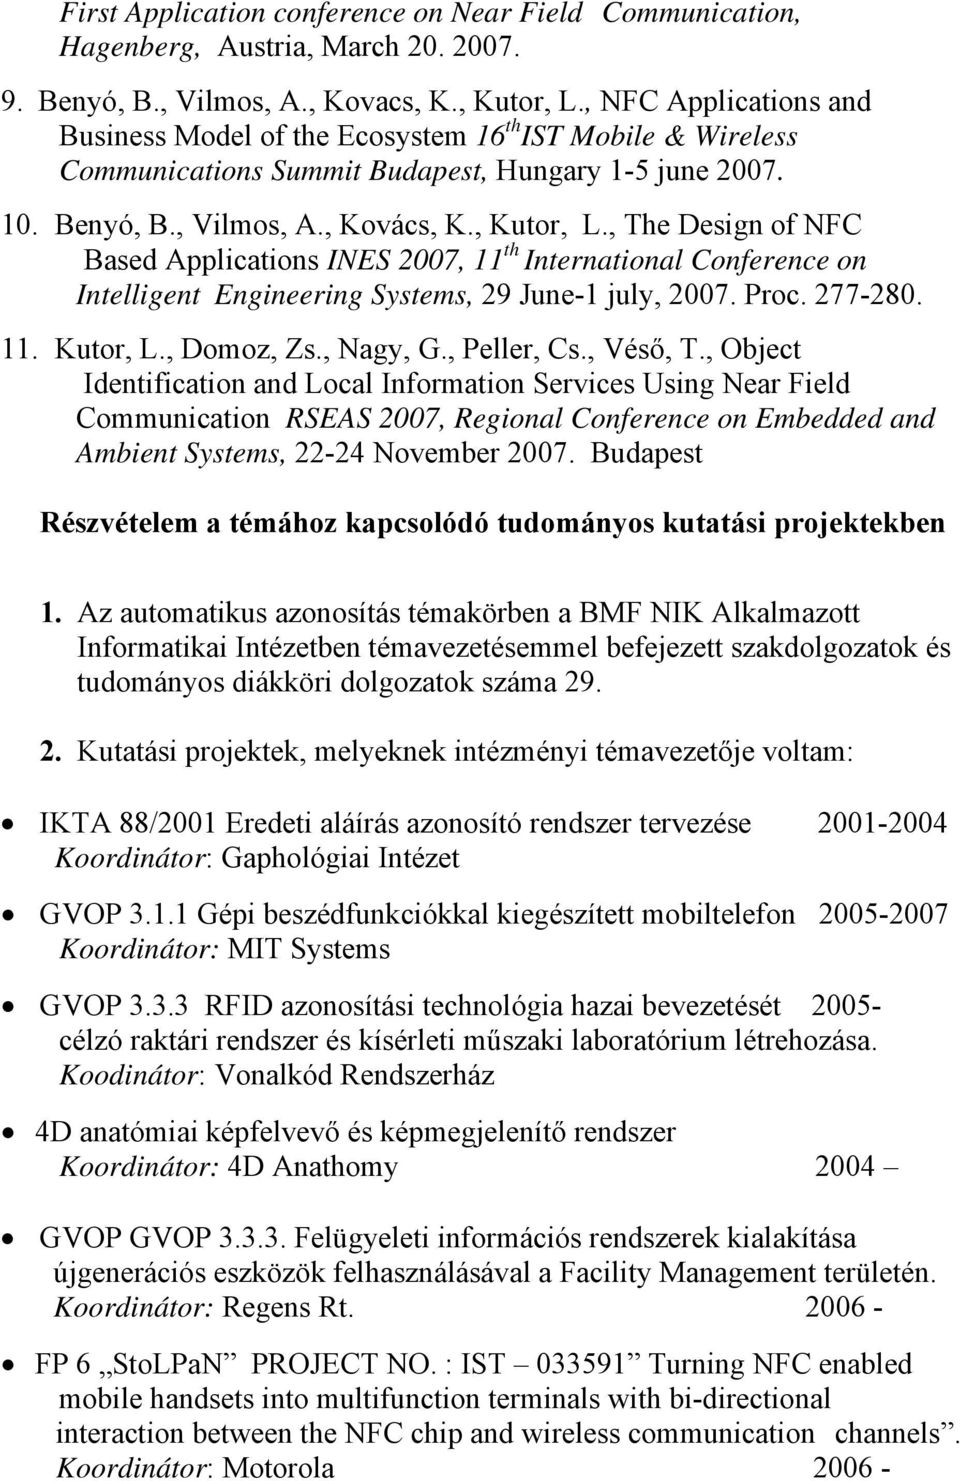 , The Design of NFC Based Applications INES 2007, 11 th International Conference on Intelligent Engineering Systems, 29 June-1 july, 2007. Proc. 277-280. 11. Kutor, L., Domoz, Zs., Nagy, G.